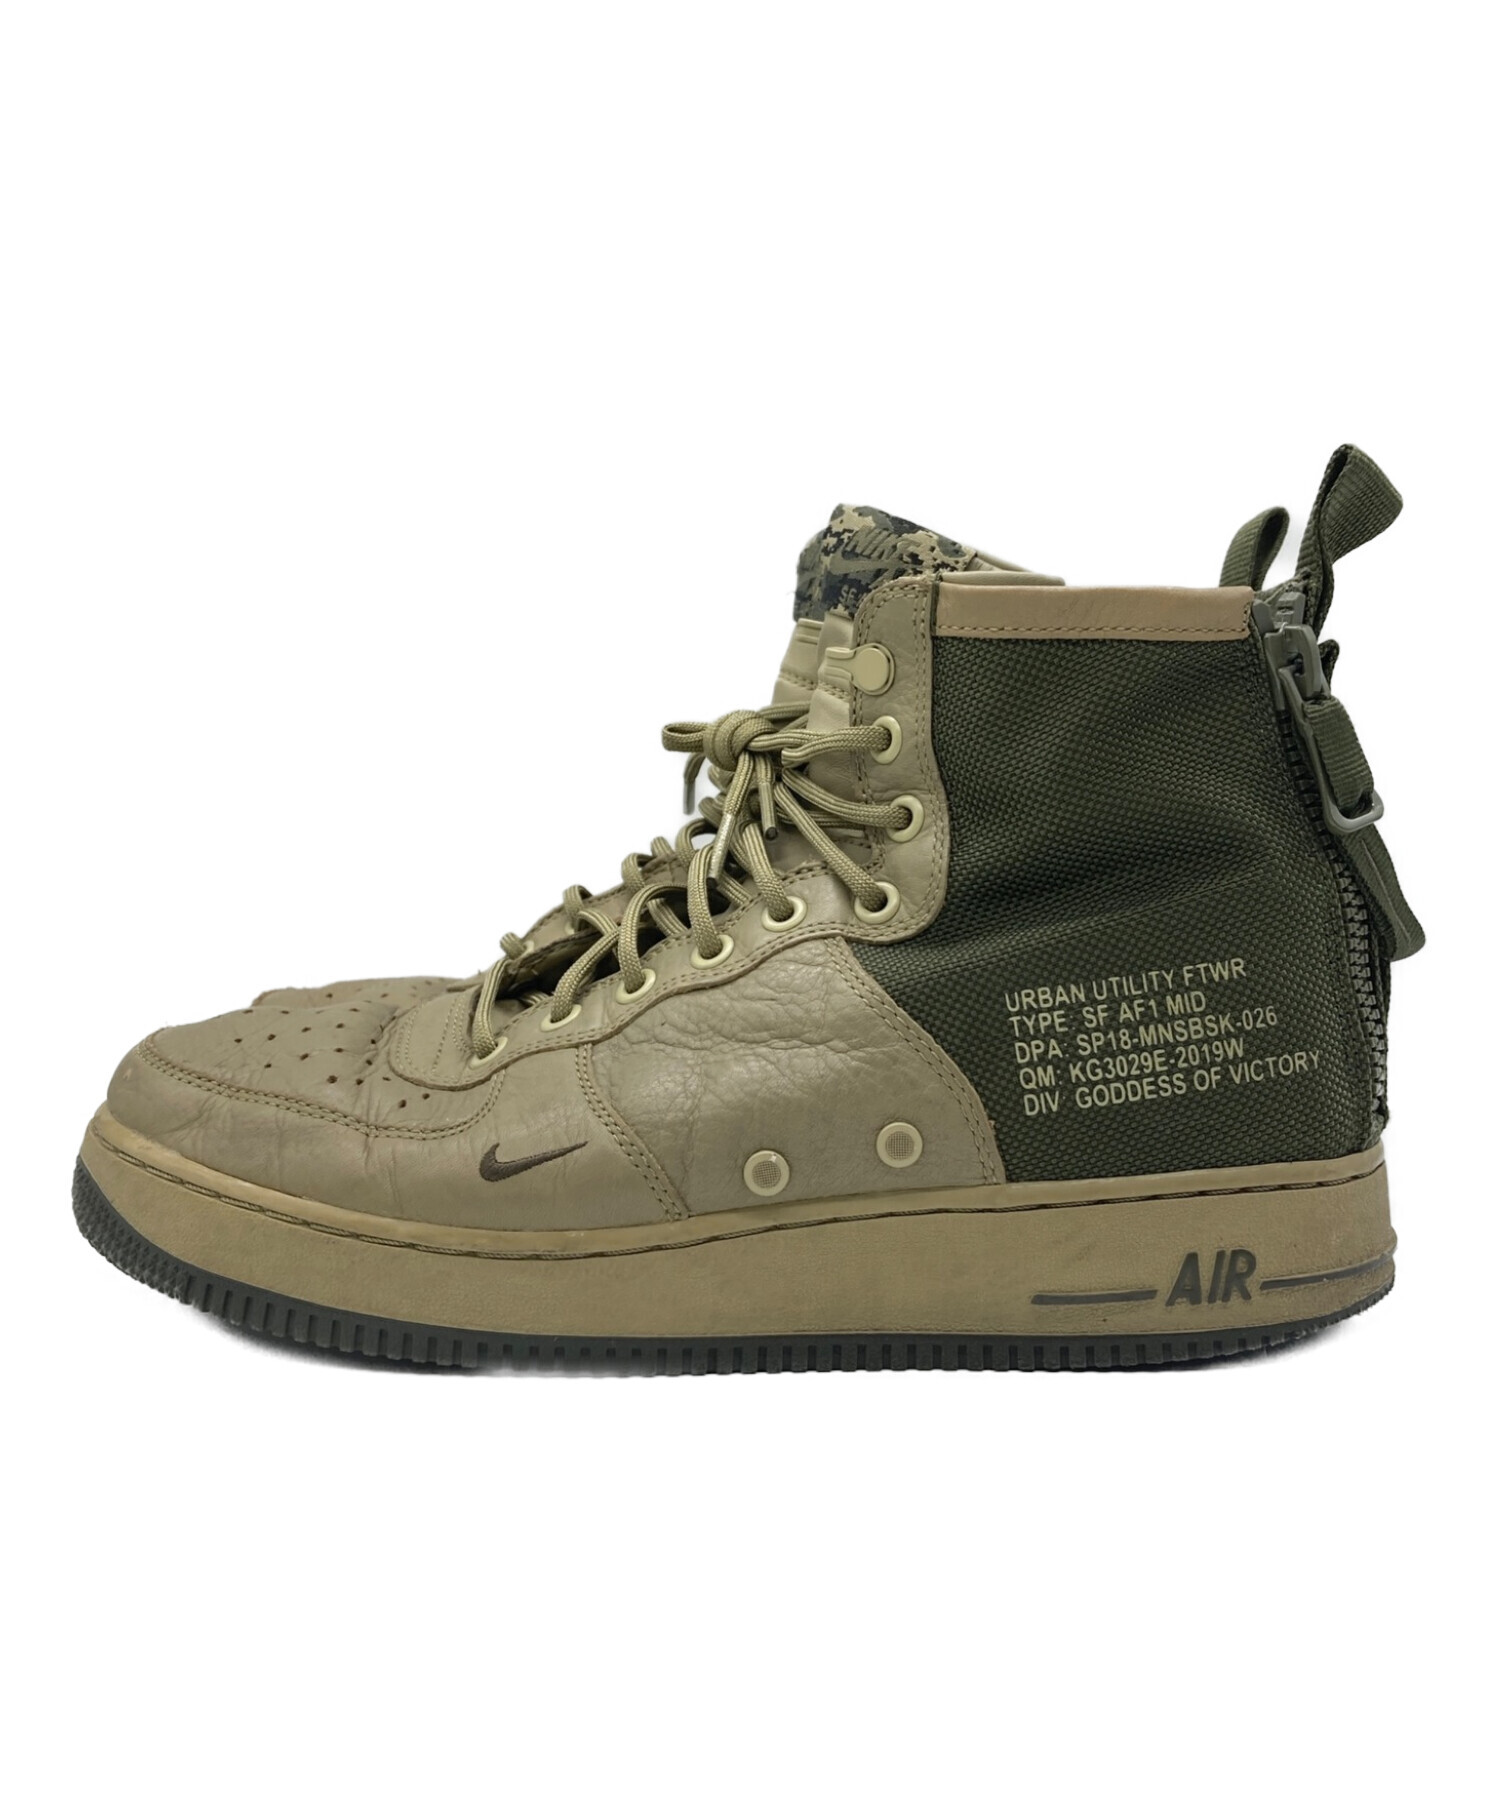 NIKE (ナイキ) Air Force 1 Mid Special Field カーキ サイズ:27cm（US9）